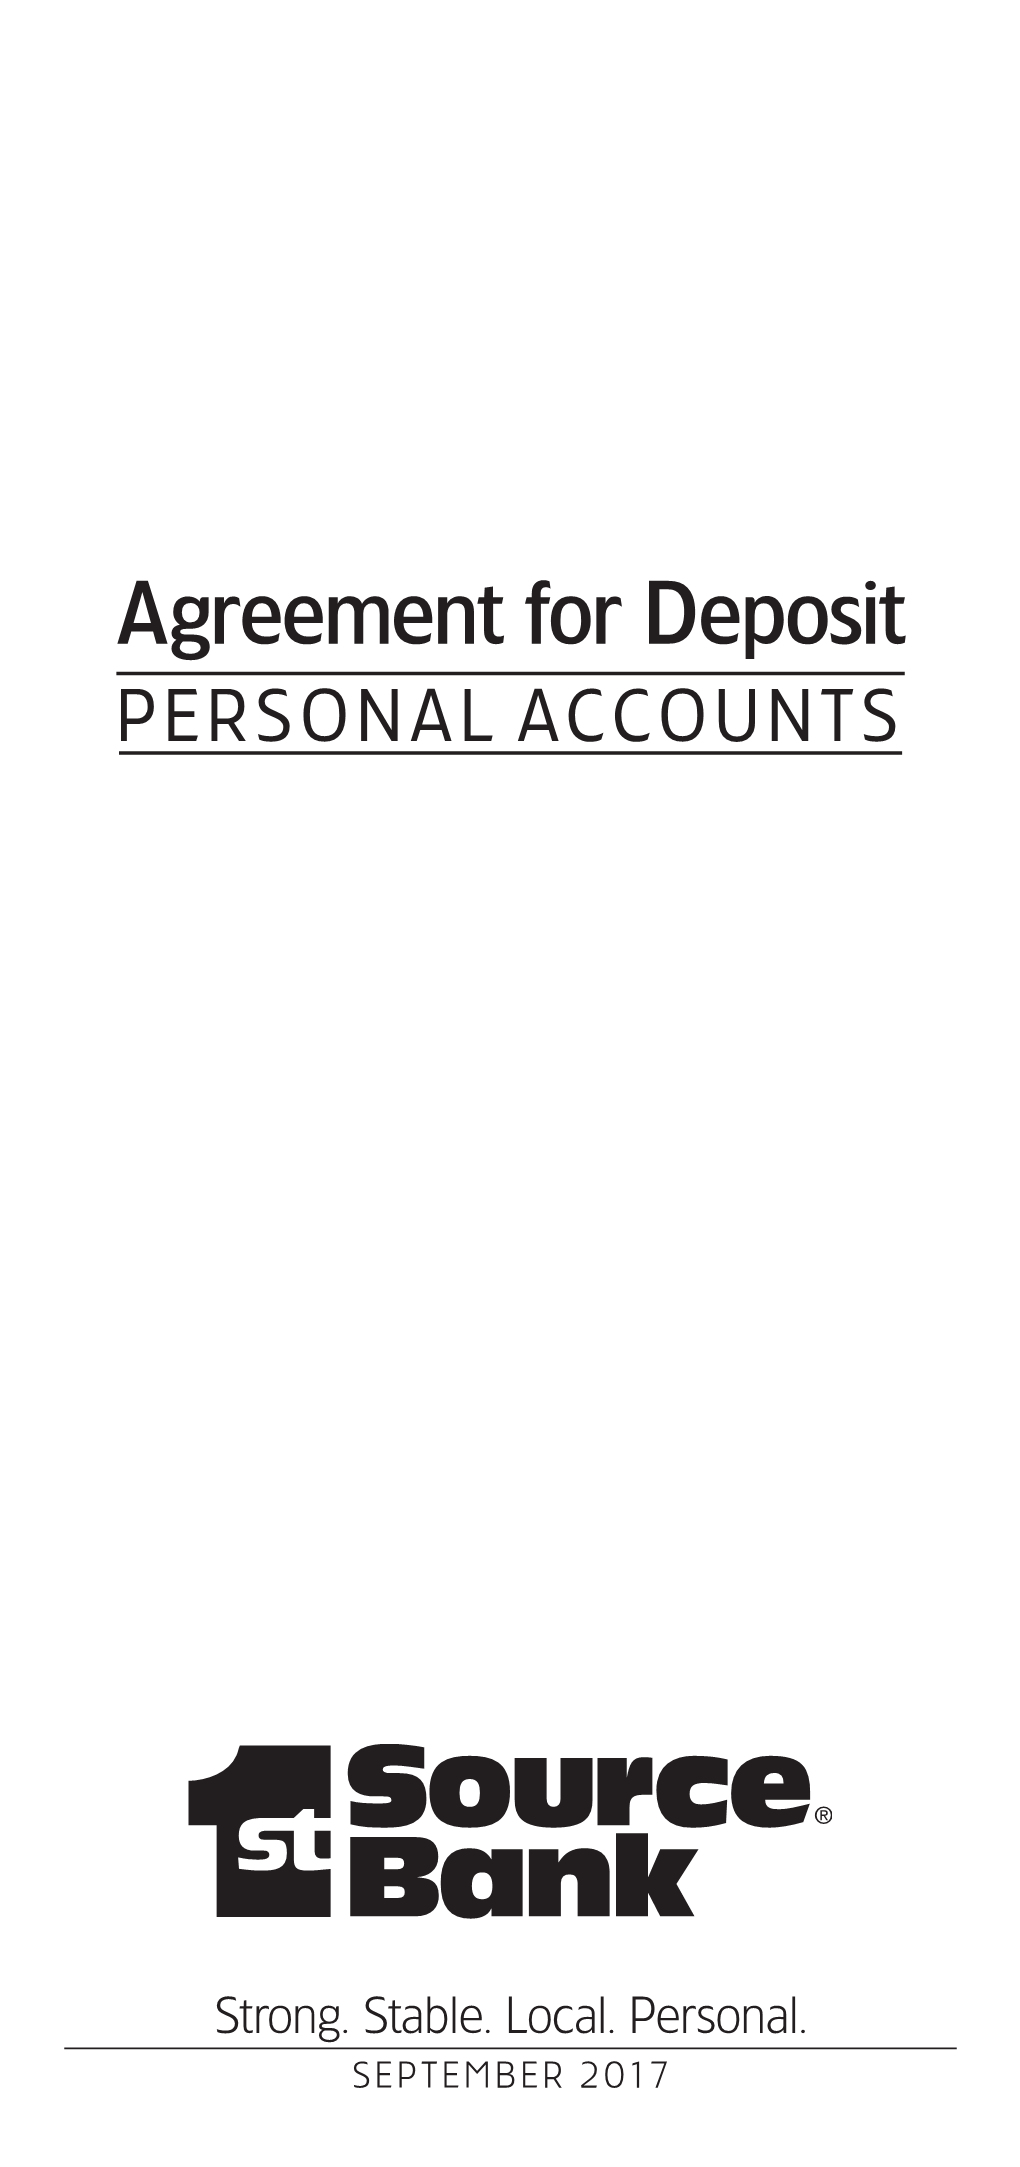 Agreement for Deposit PERSONAL ACCOUNTS